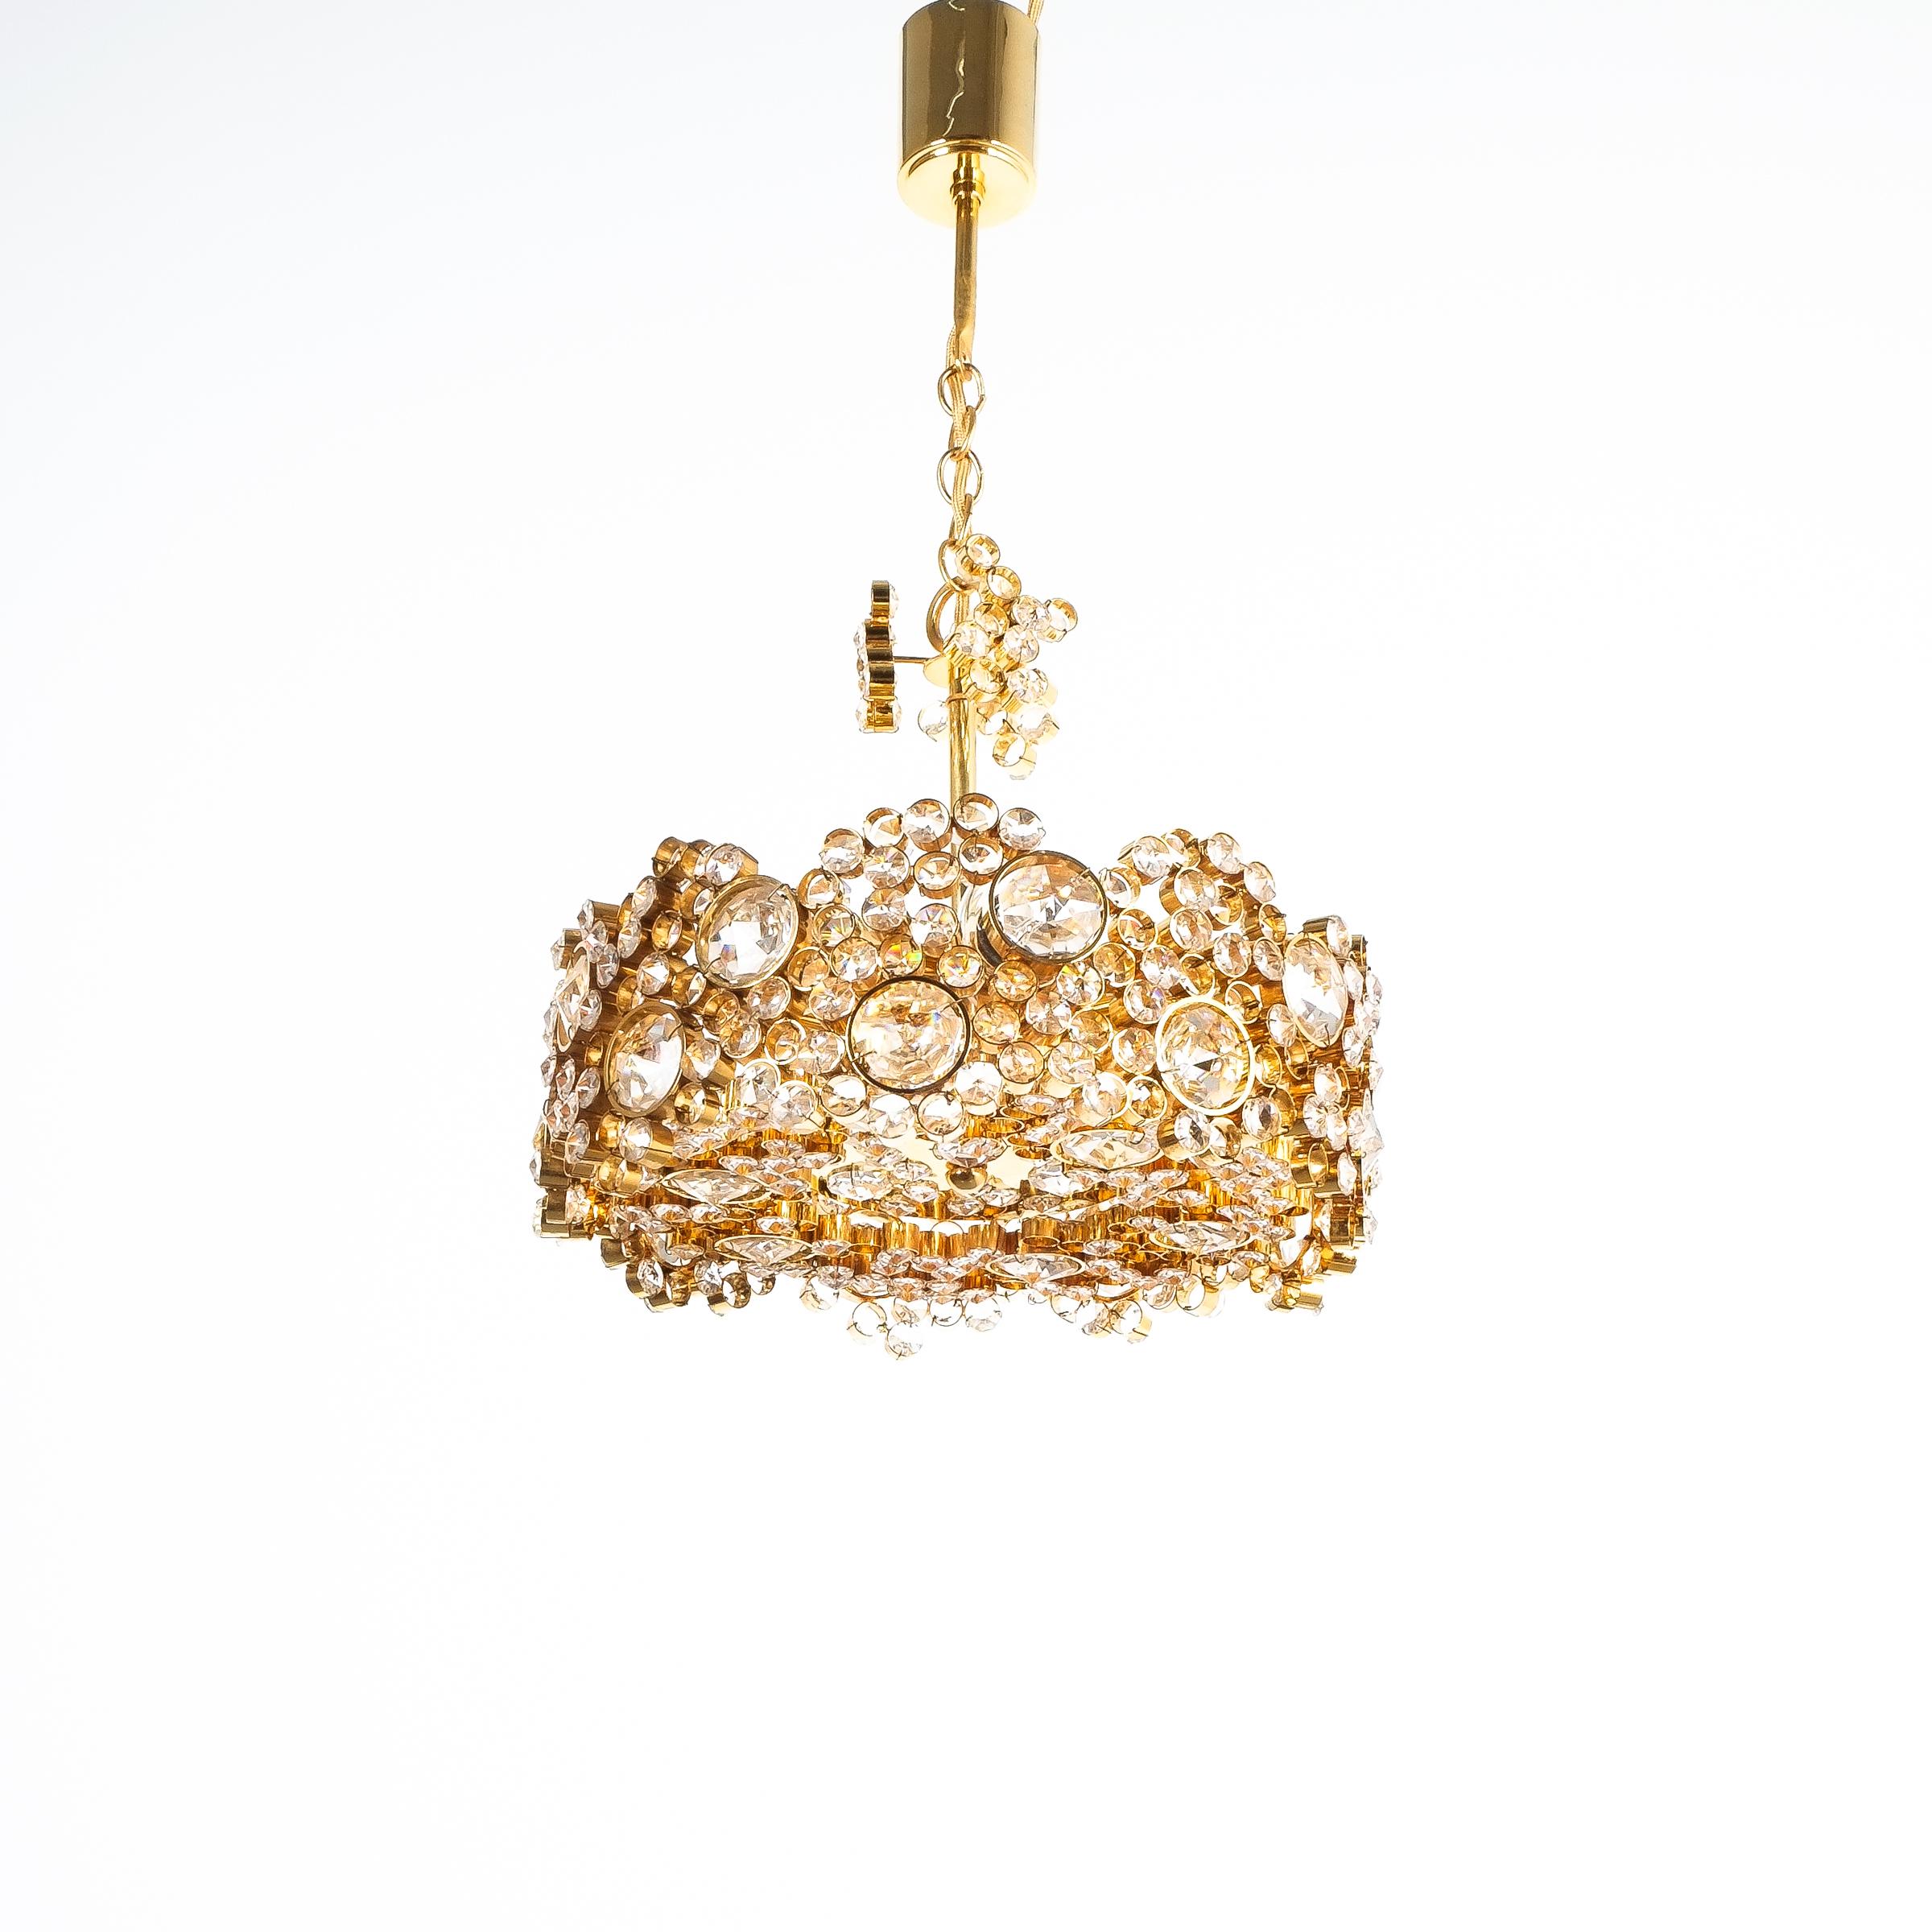 Petite Palwa Crystal glass gold-plated brass chandelier refurbished lamp, circa 1965. This lamp was handcrafted and executed with great attention to detail, consisting of hundreds of gilded brass rings encrusted with crystal glass varying in size.